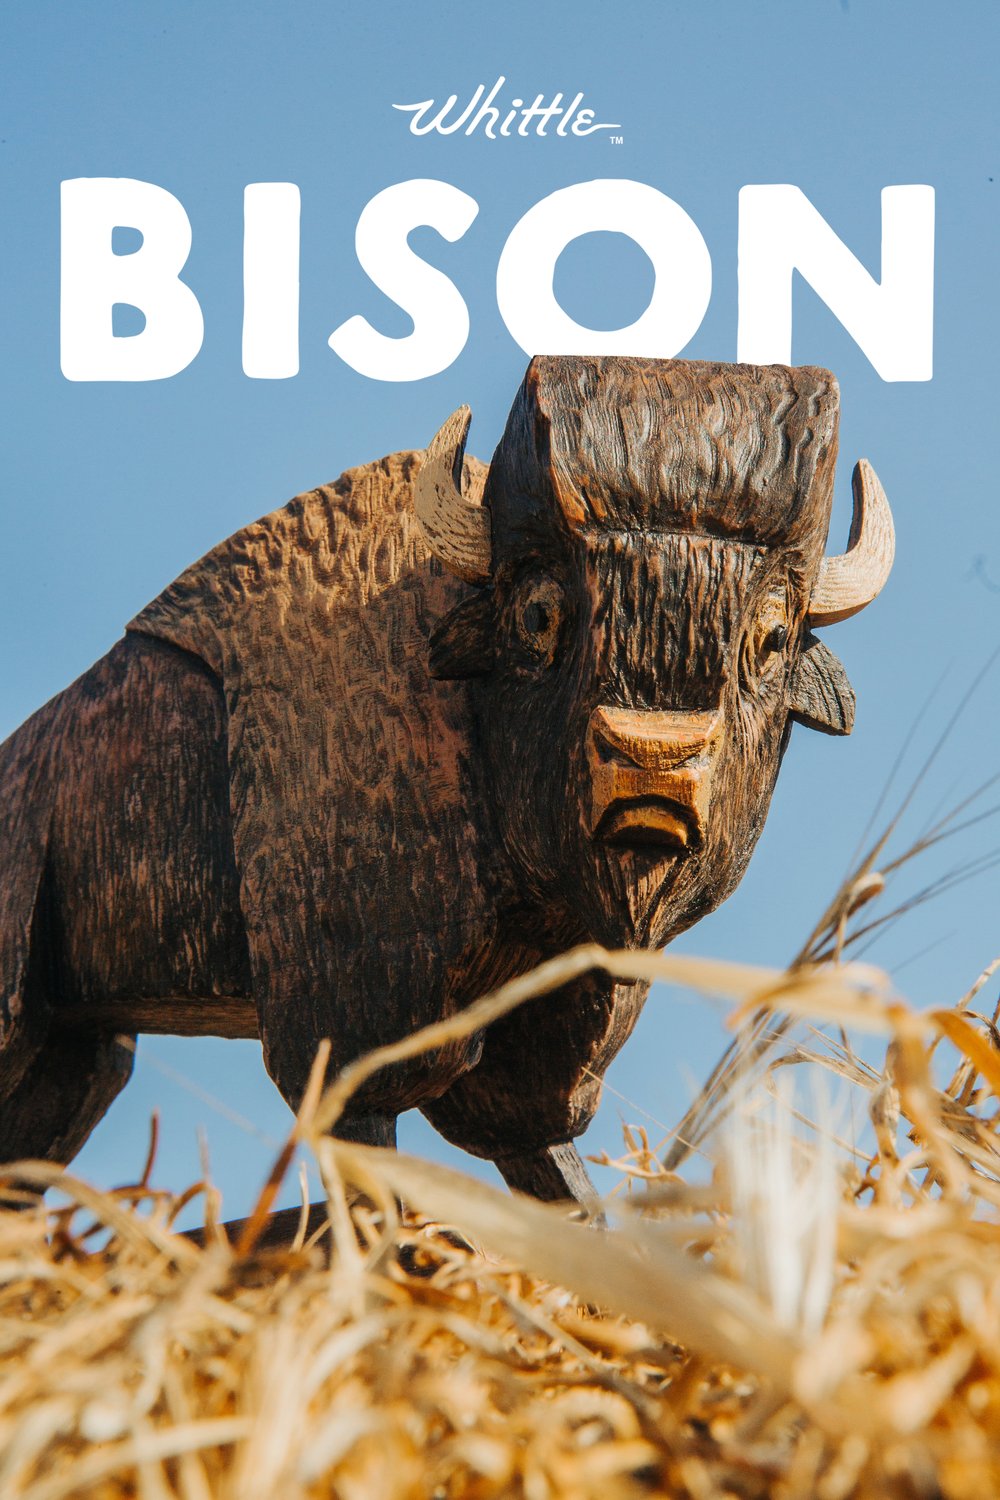 Image of Whittle Bison